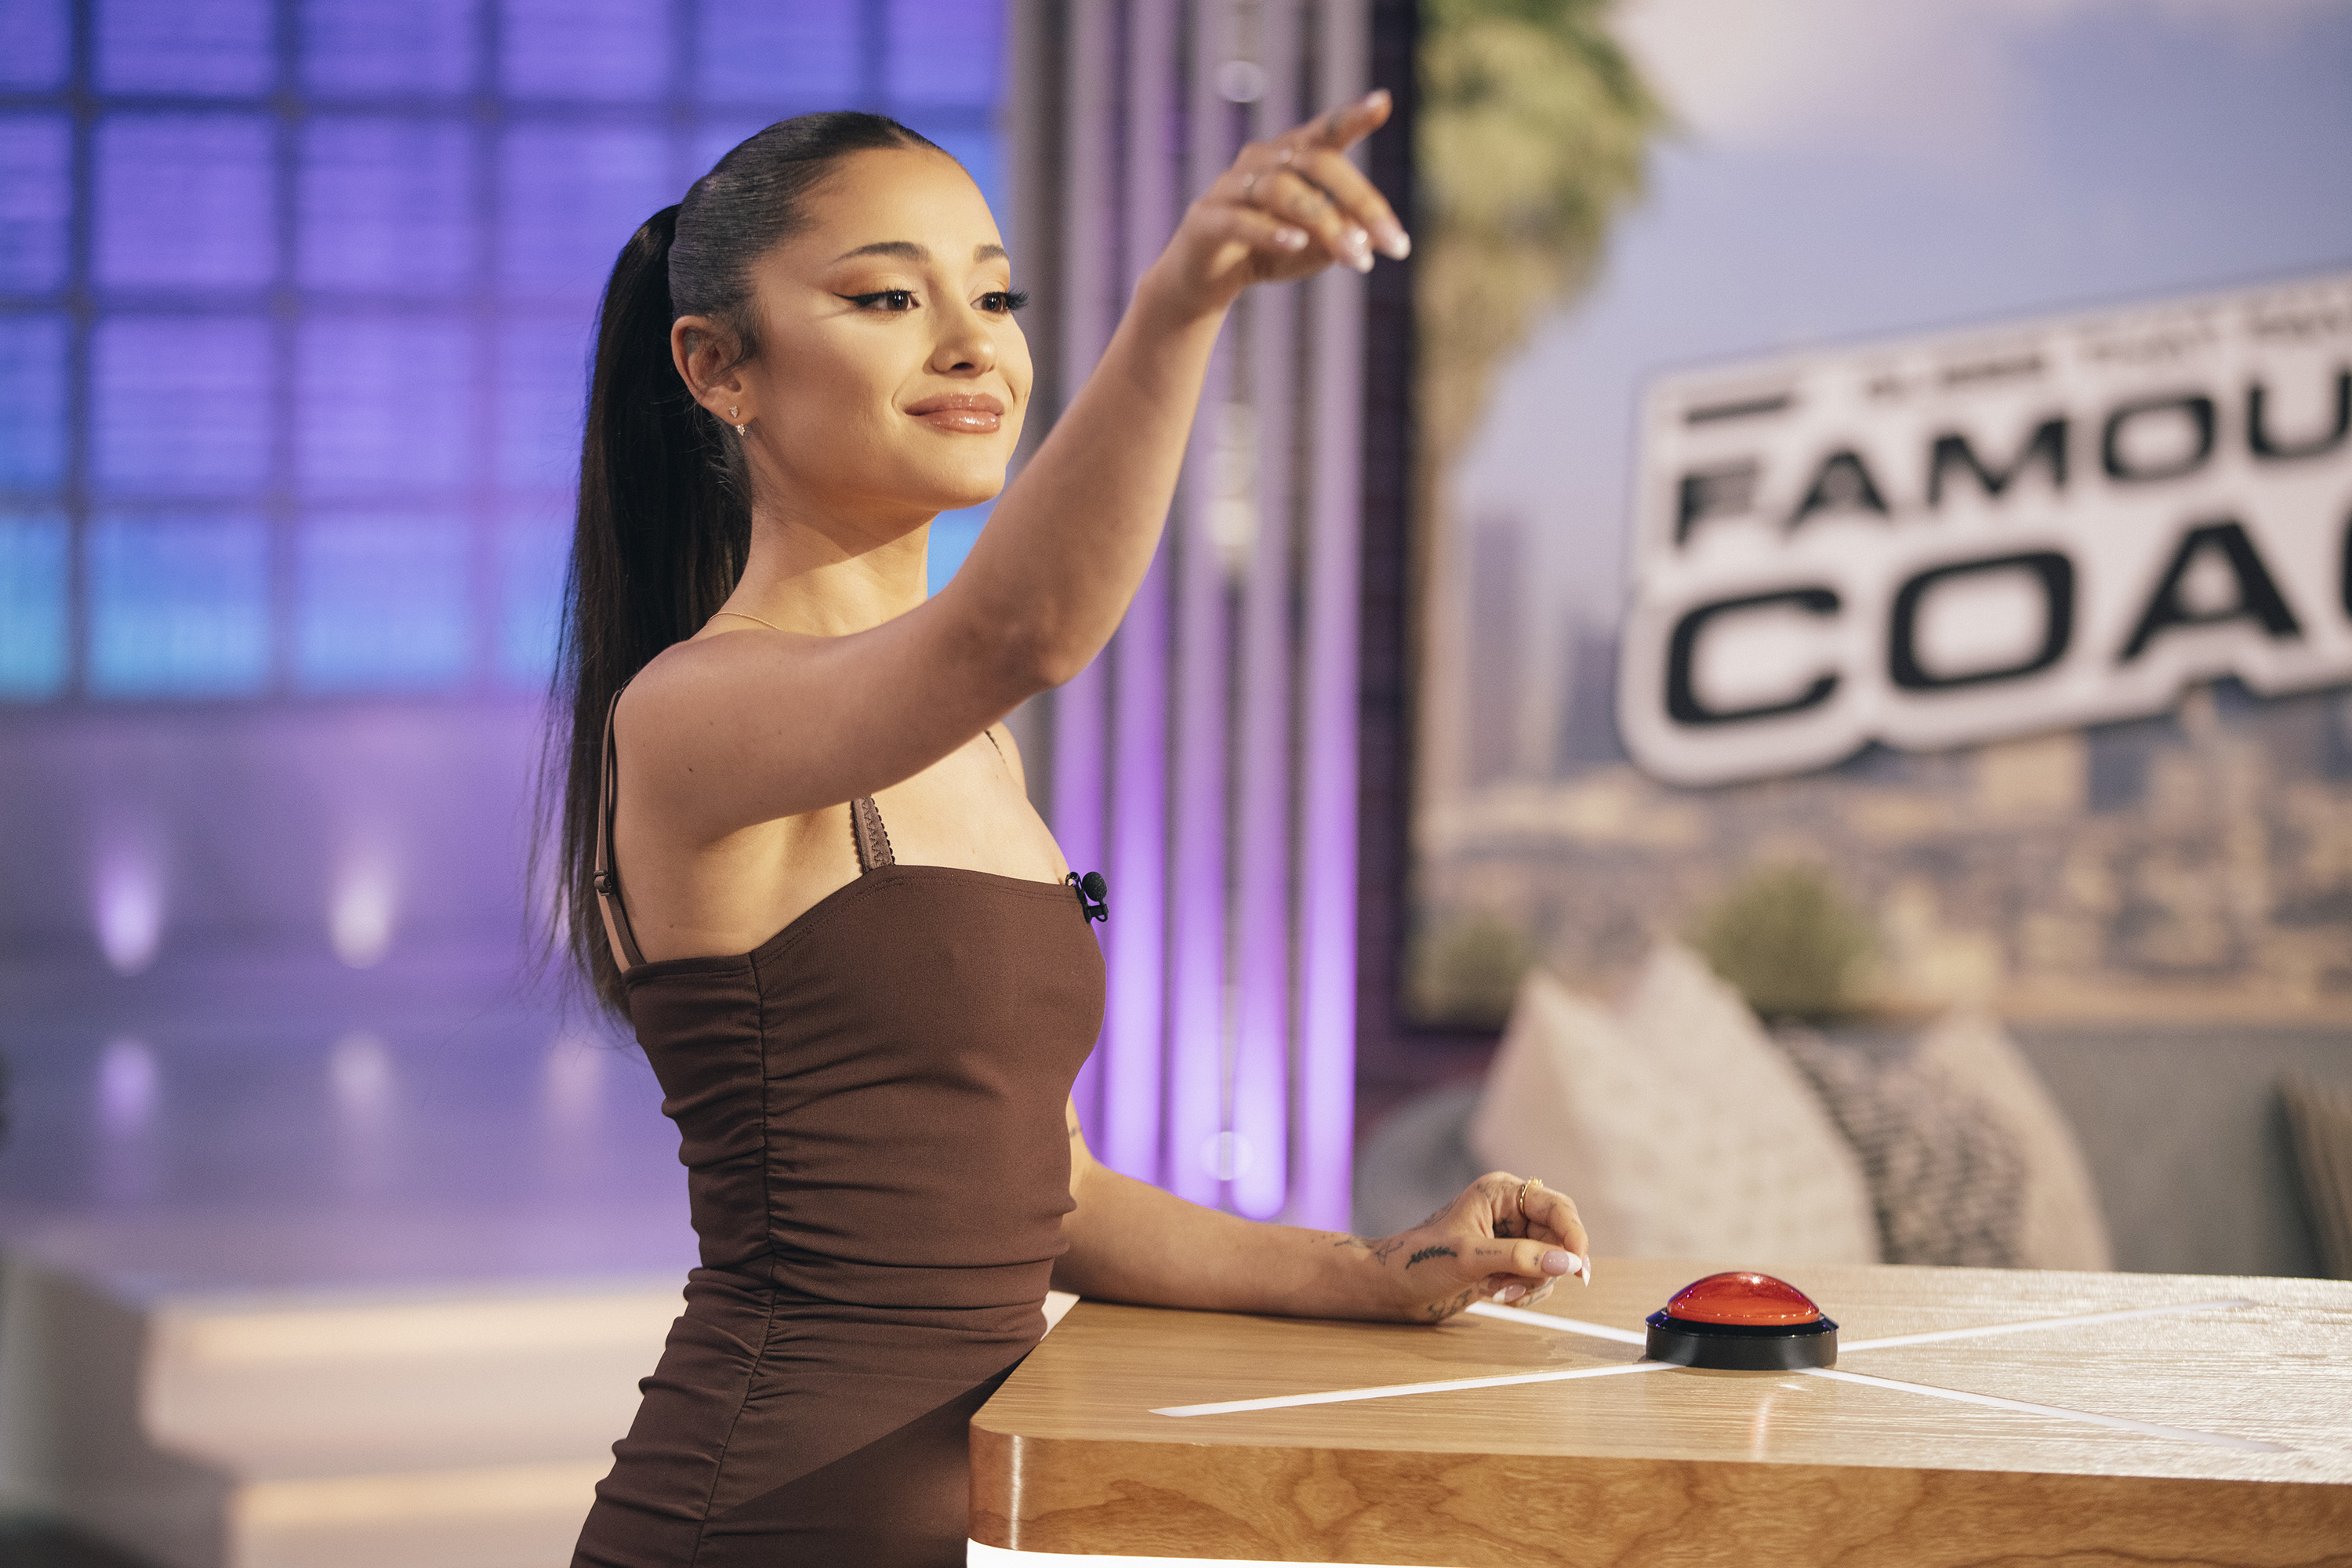 ariana on a game show set, wearing a dress and gesturing with her arm with buzzers on the table